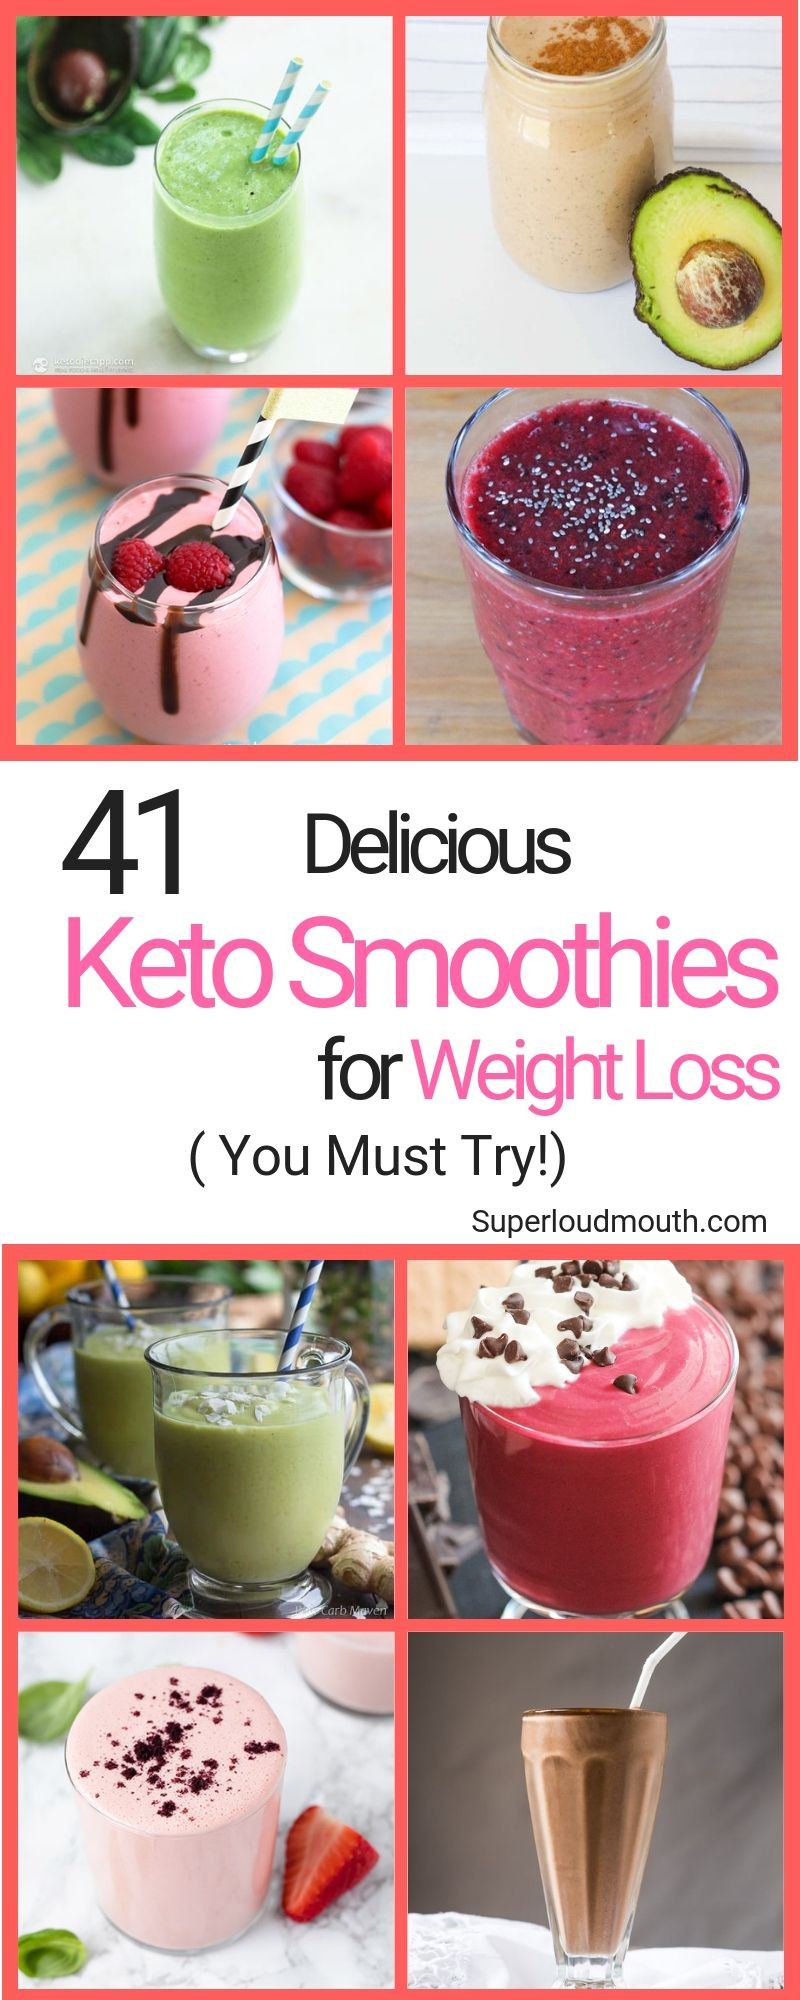 Healthy Keto Smoothie Recipes
 101 Healthy Keto Smoothies Soups and Shakes Recipes for